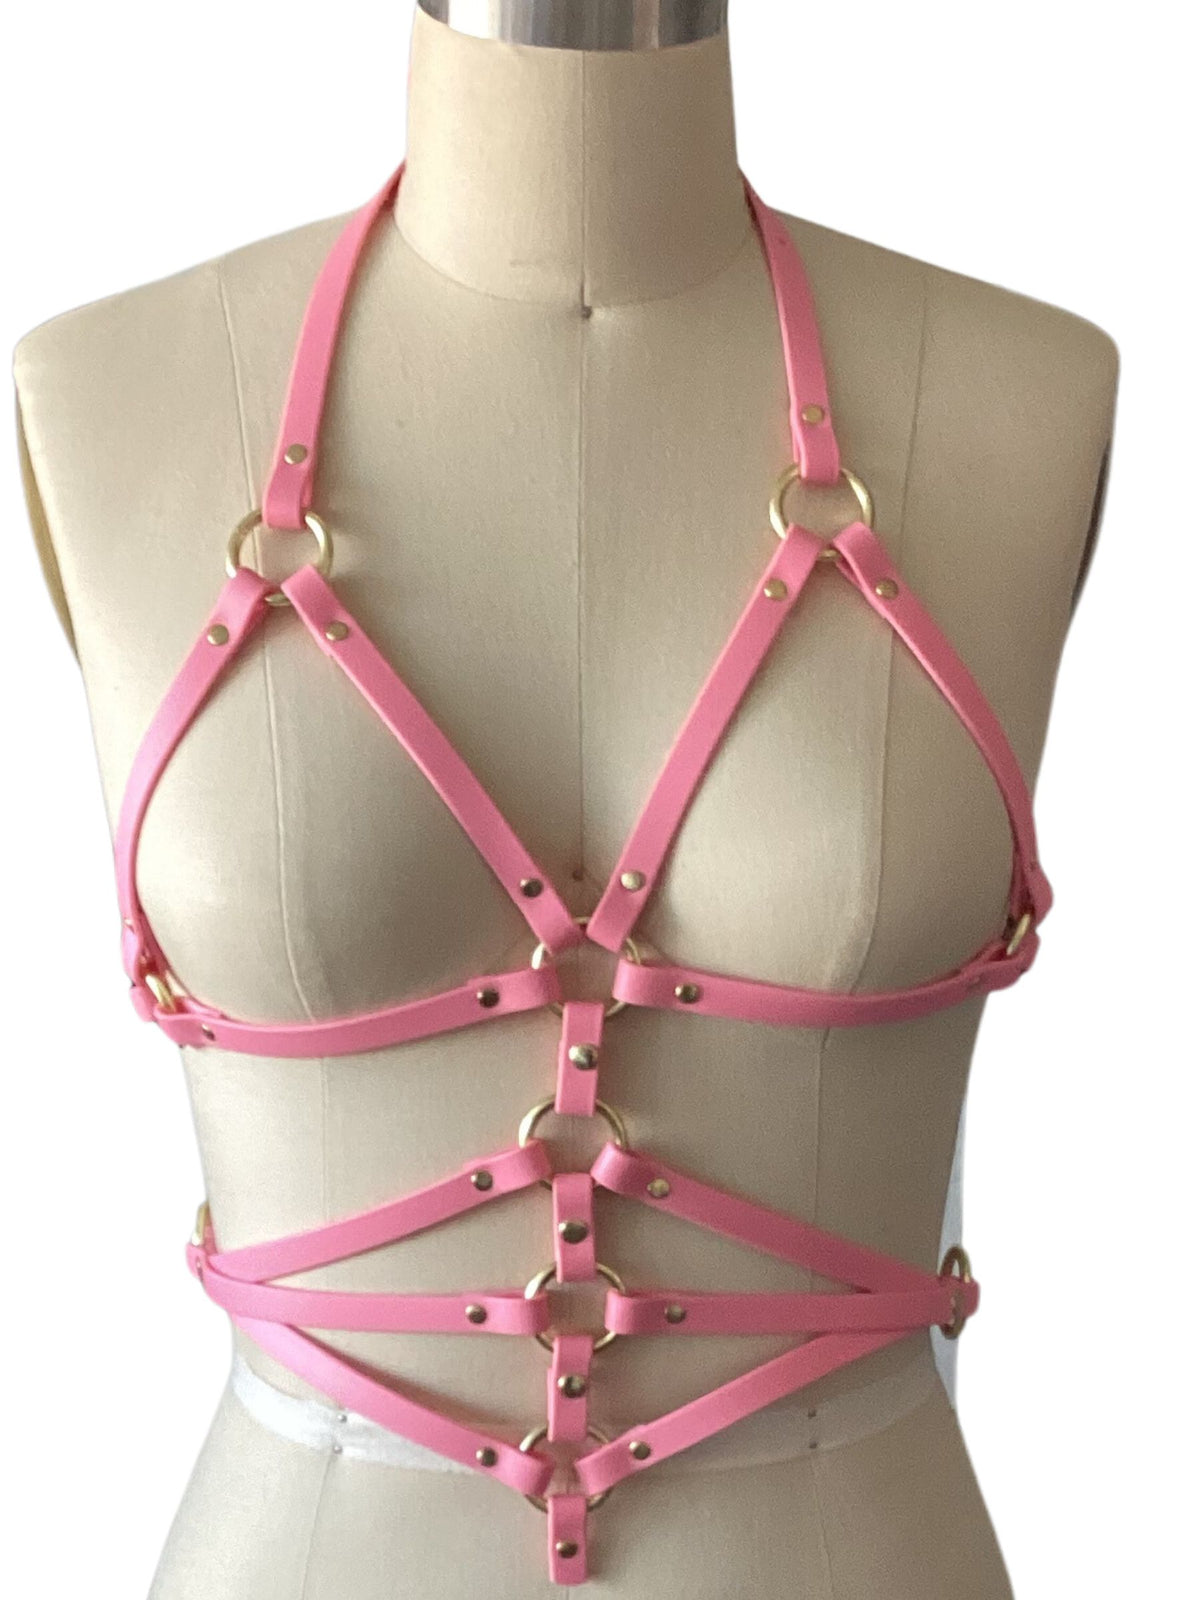 Pastel pink classic harness top outfit for women shown on a mannequin against a white background.